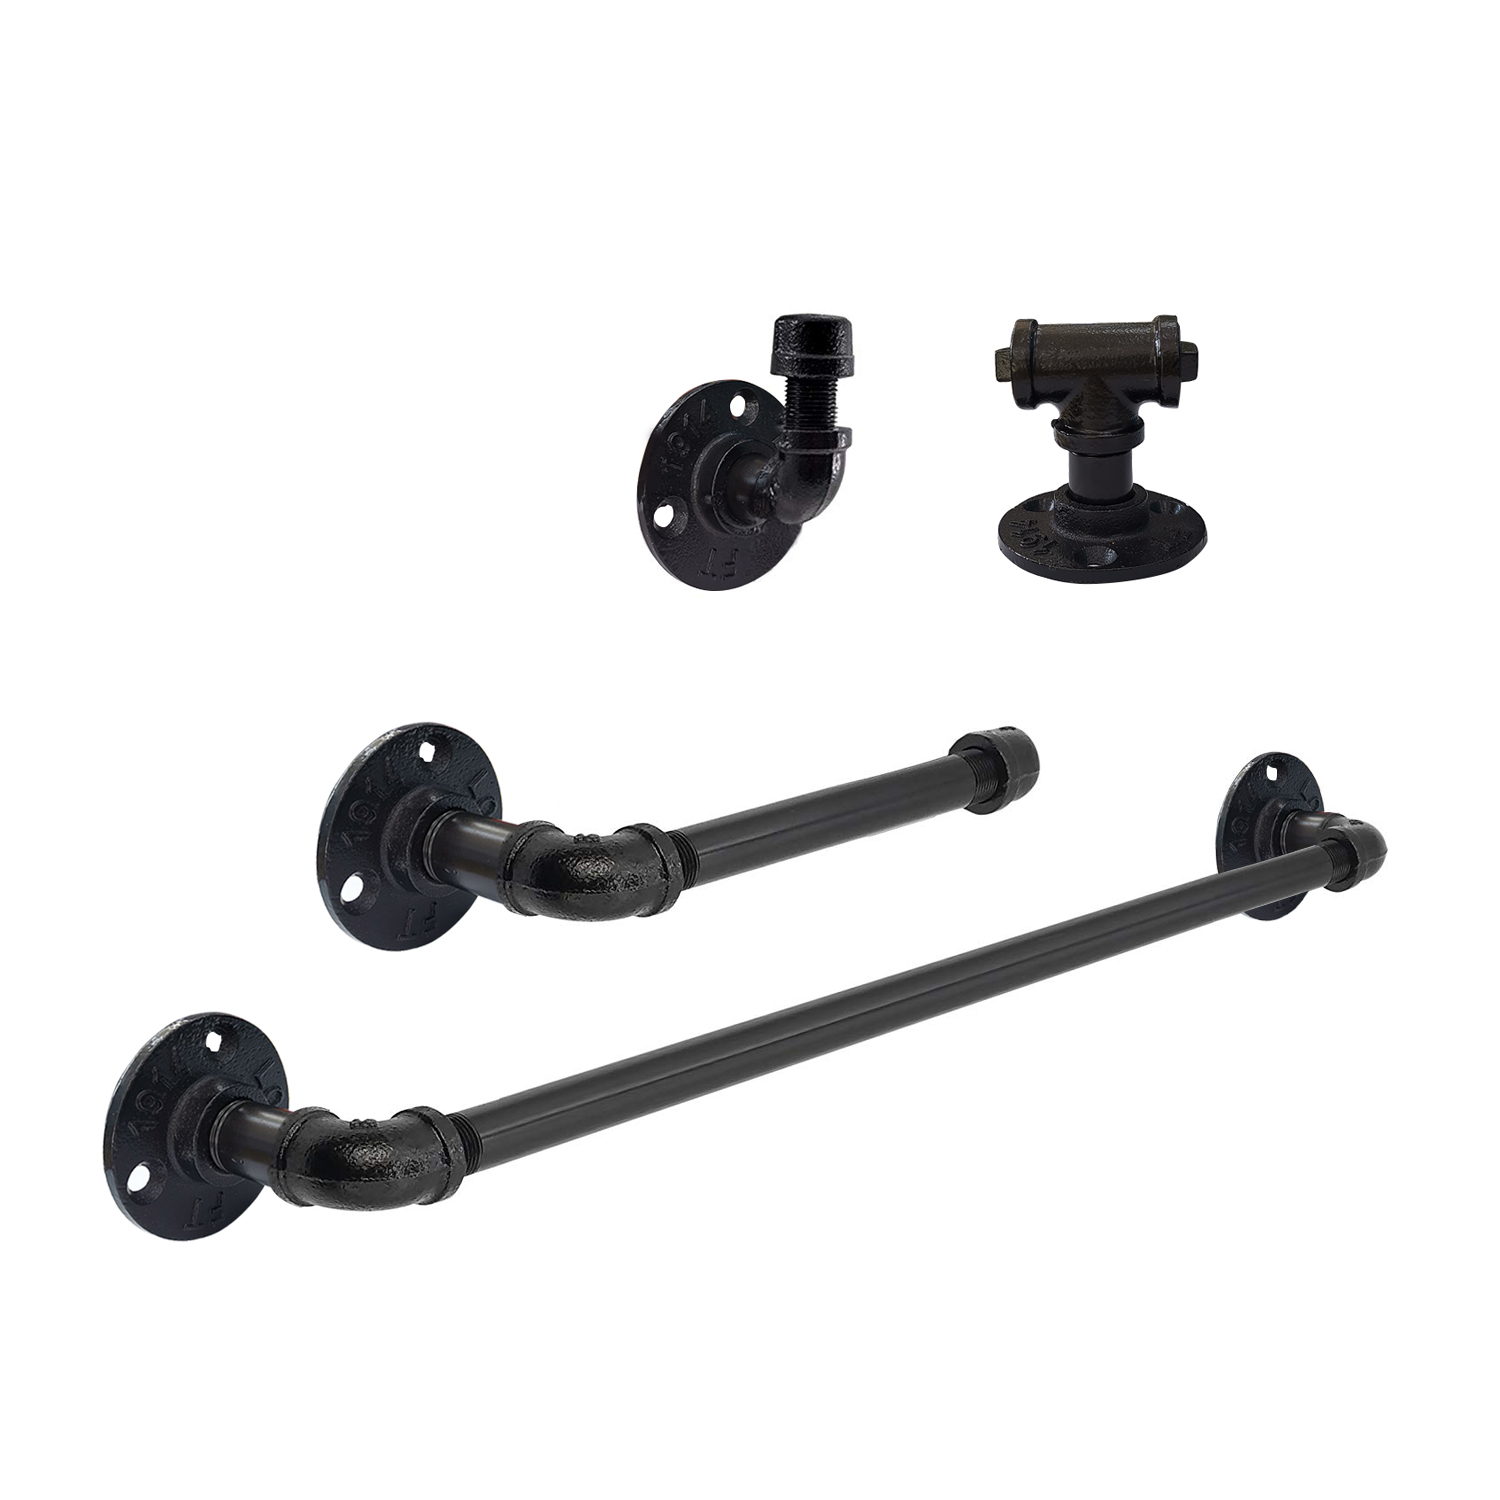 Industrial Pipe Bathroom Hardware Fixture Set by Pipe Decor | 4 Piece Kit Includes Robe Hooks, 18 Inch Towel Bar and Toilet Paper Holder, Heavy Duty DIY Style, Rustic and Chic Industrial Iron Pipe Electroplated Black Finish